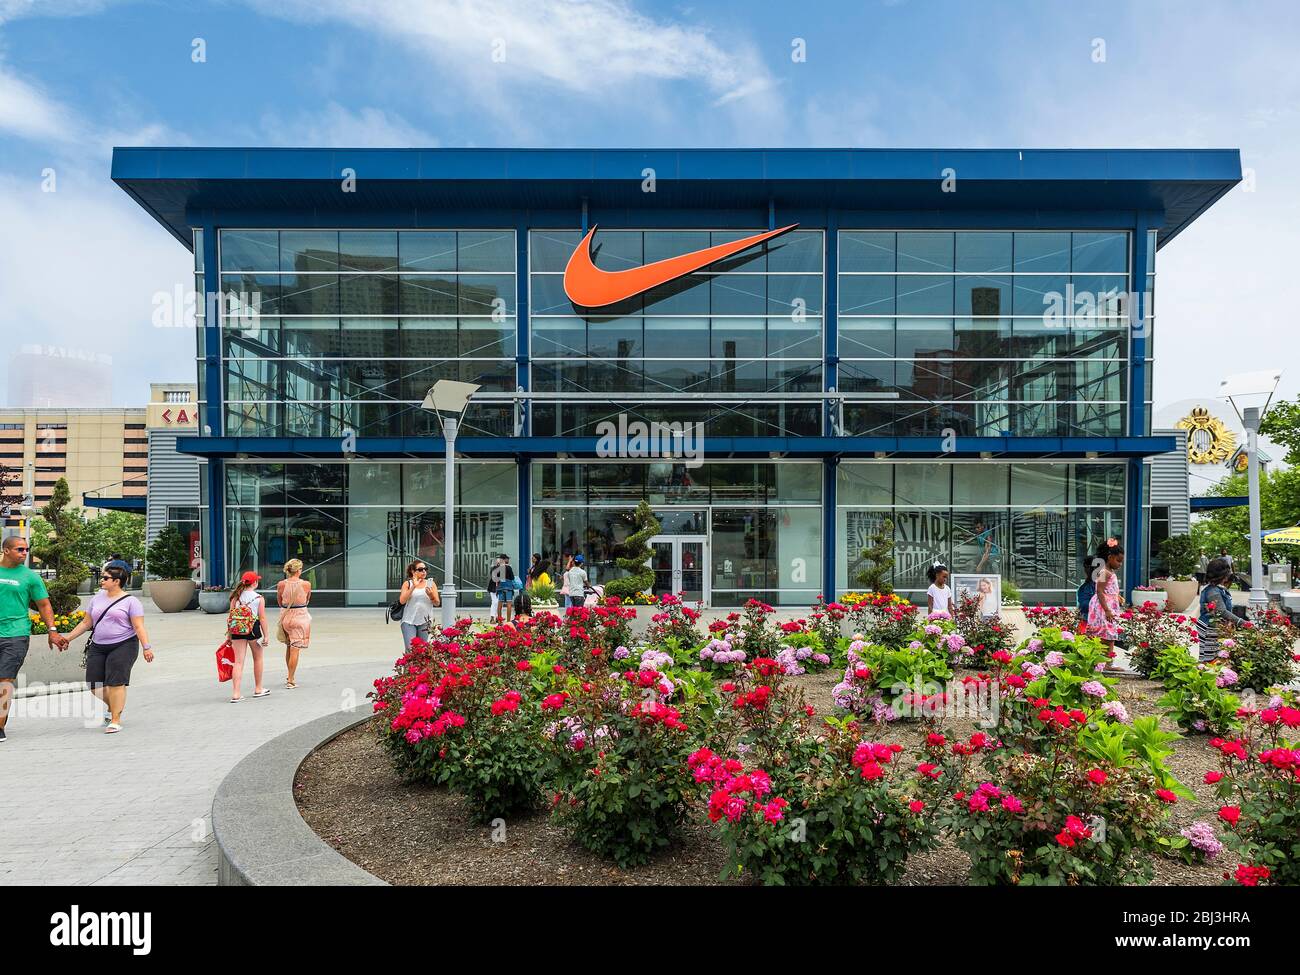 Nike Factory Store High Resolution Stock Photography and Images - Alamy